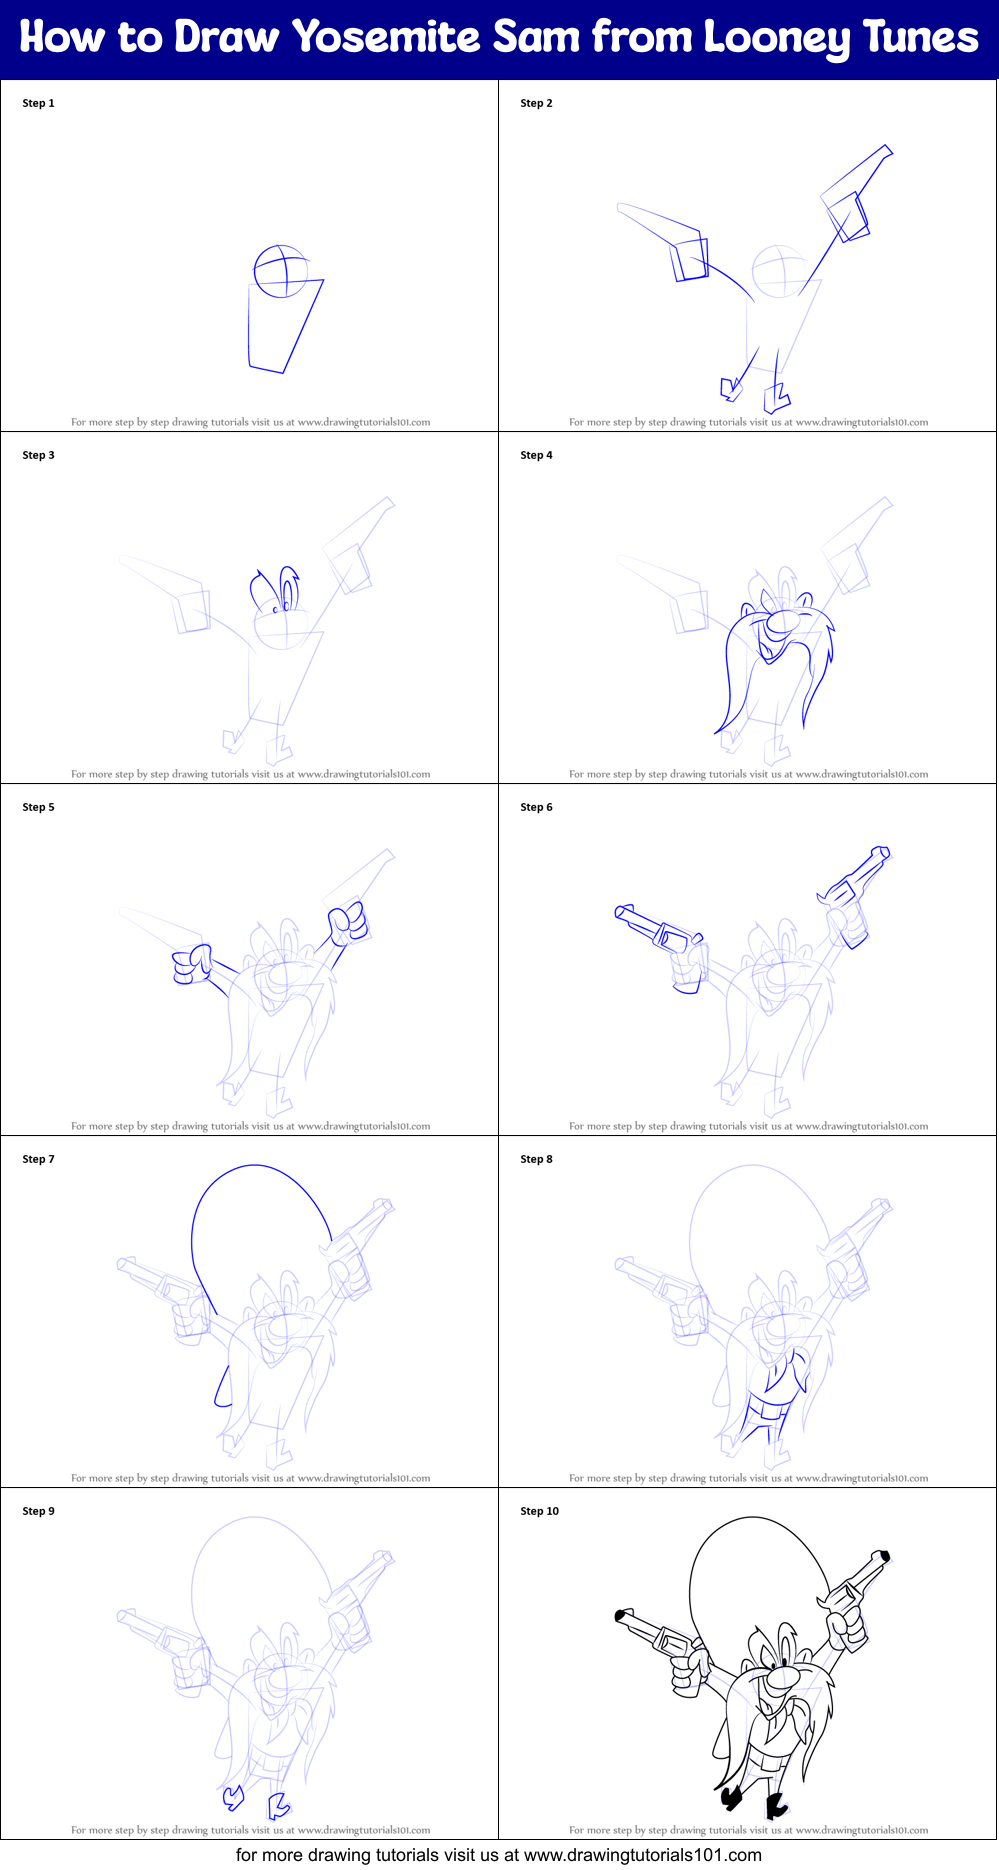 How to Draw Yosemite Sam from Looney Tunes printable step by step